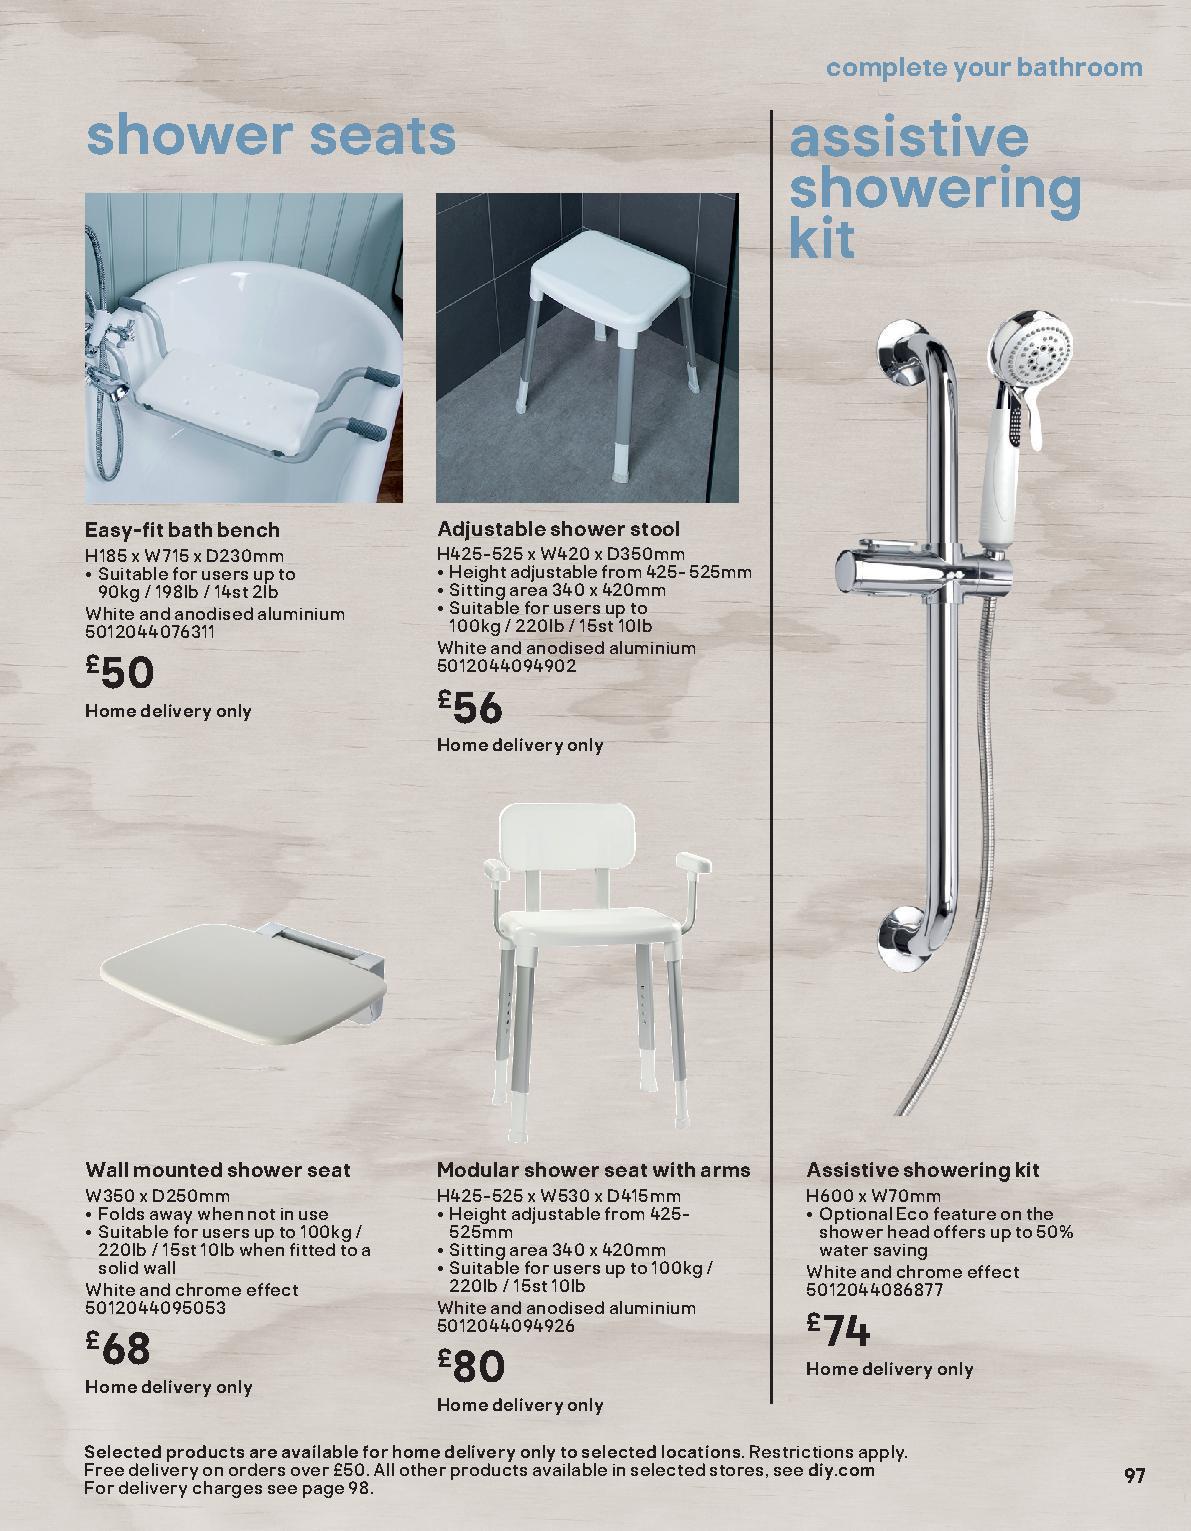 B&Q Bathroom Product Guide Offers from 1 October